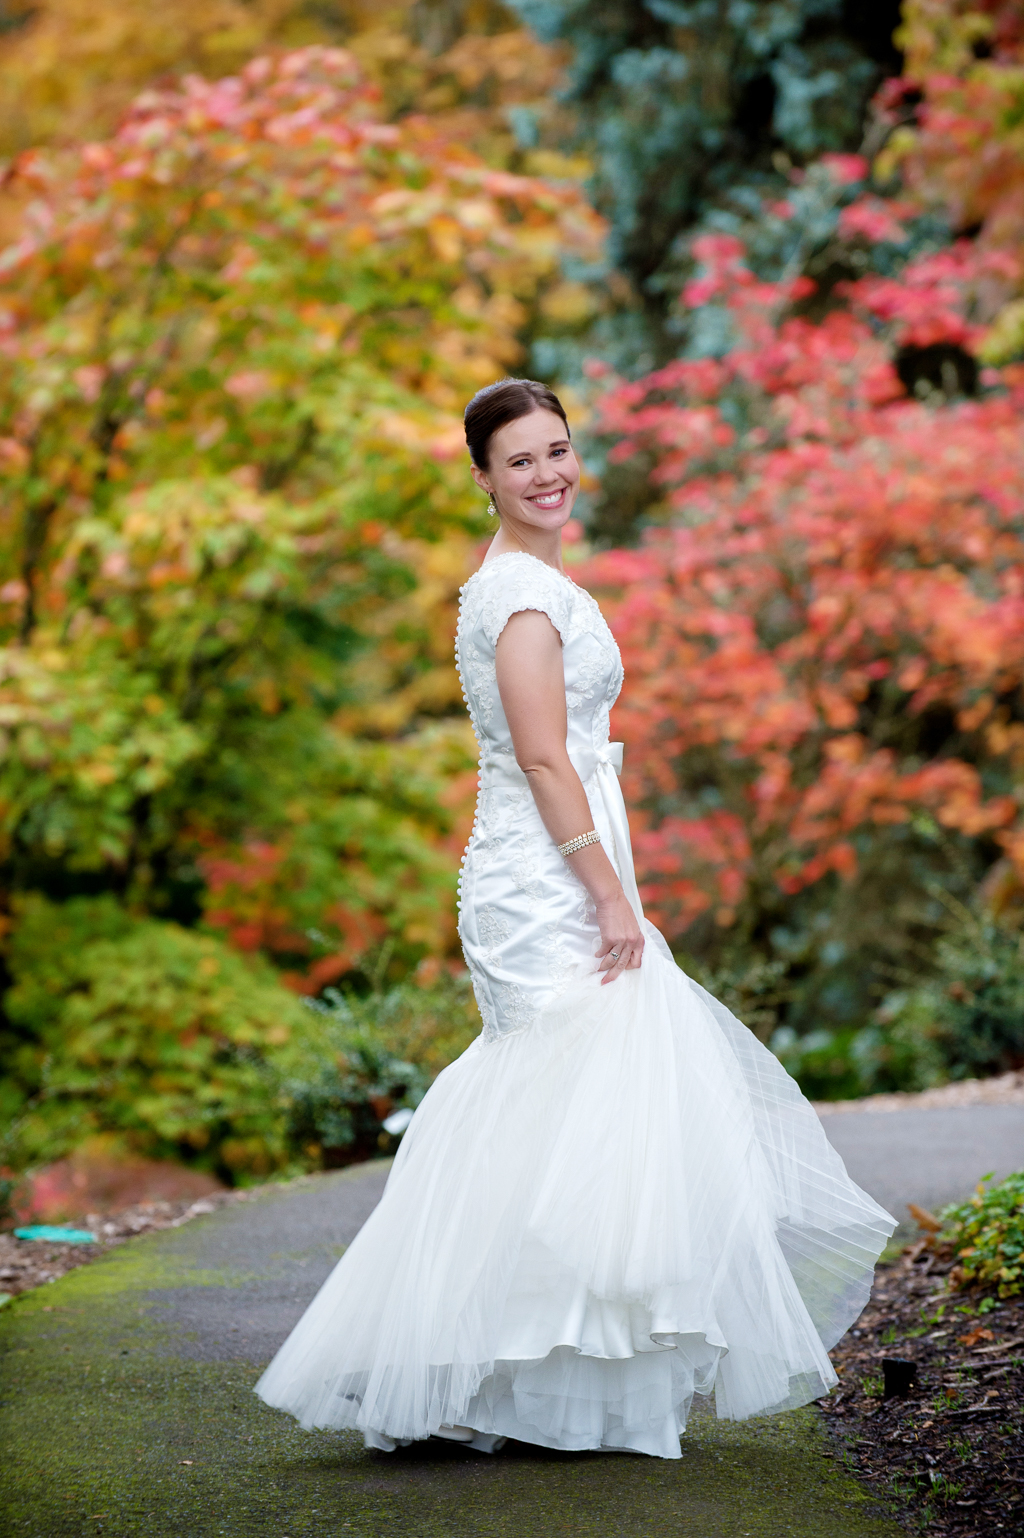 bride spins around on walking path surrounded by orange and red autumn leaves